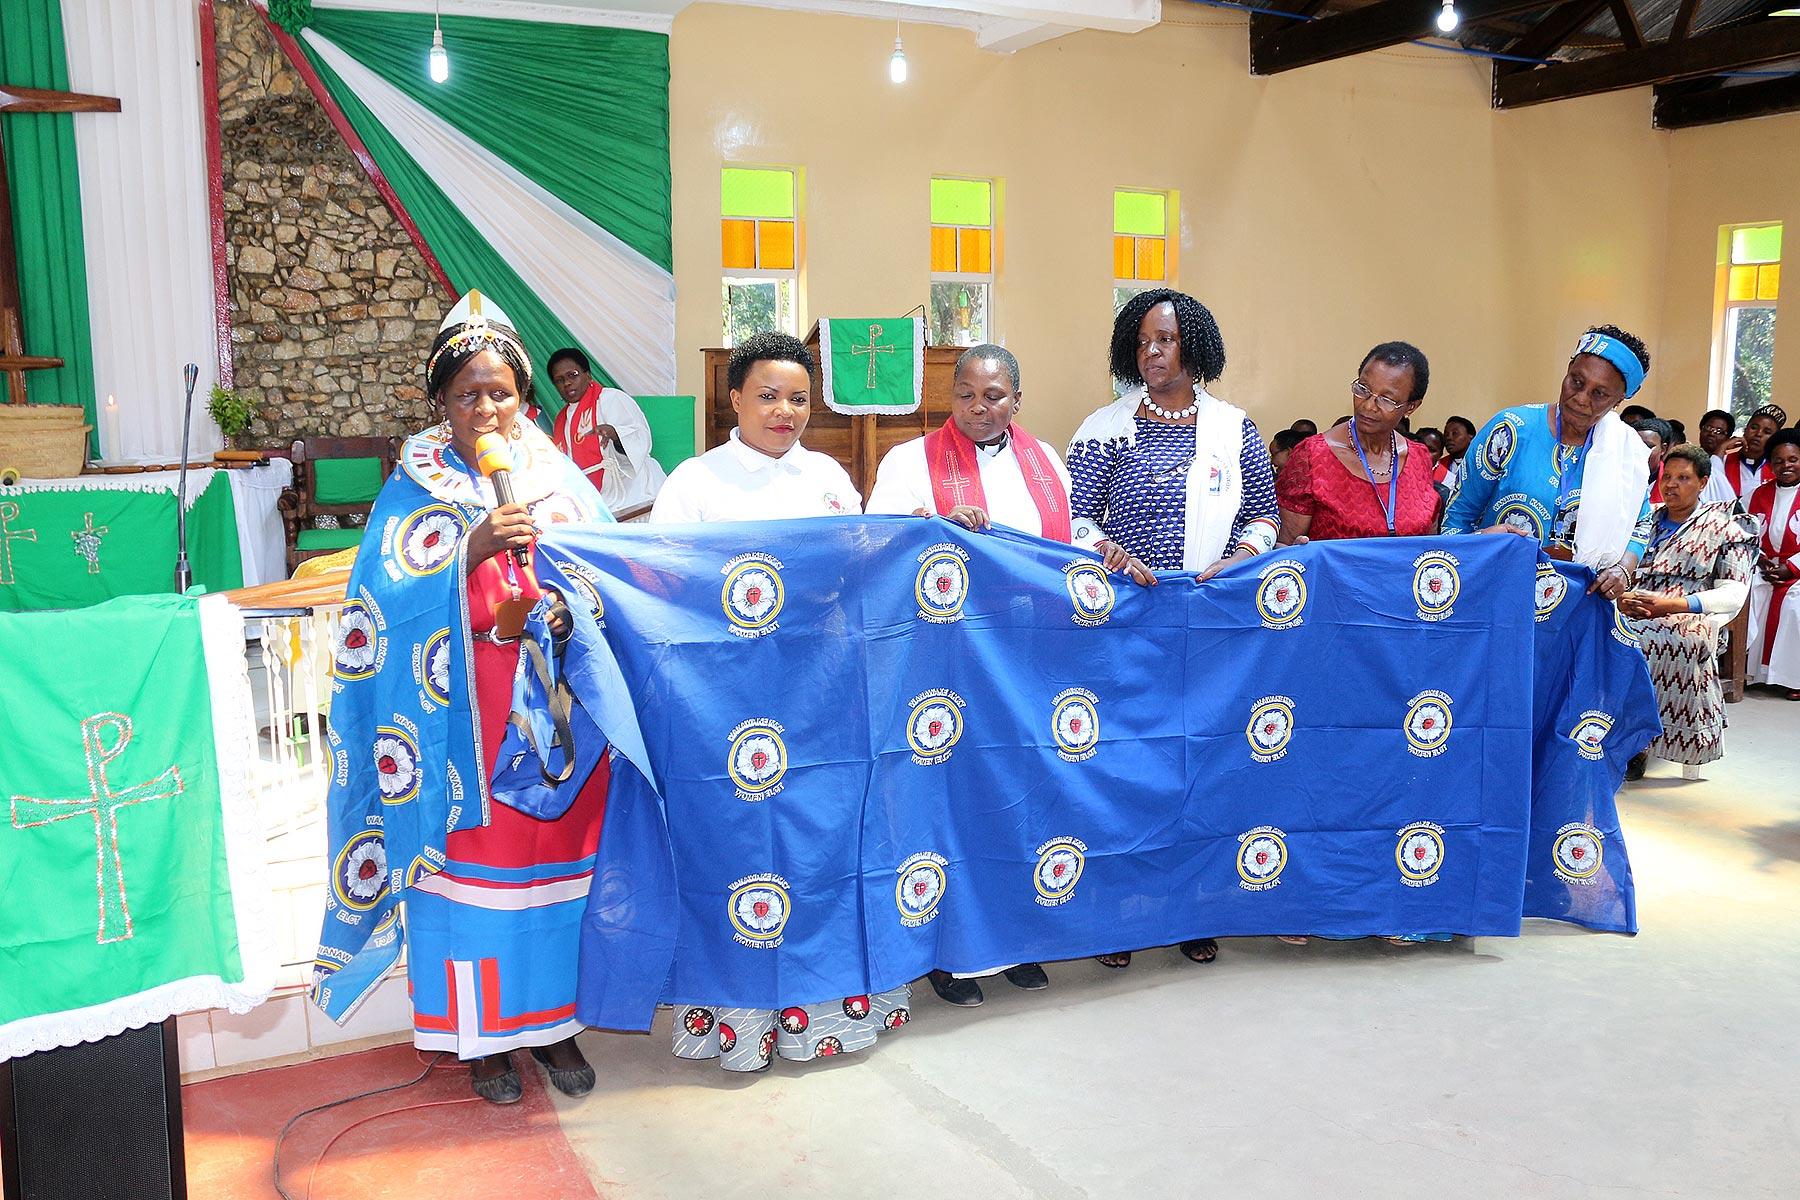 Members of the Executive Committee of the ELCT Women's Department display their national banner. All Photos: ELCT Communication/Evans Ayo